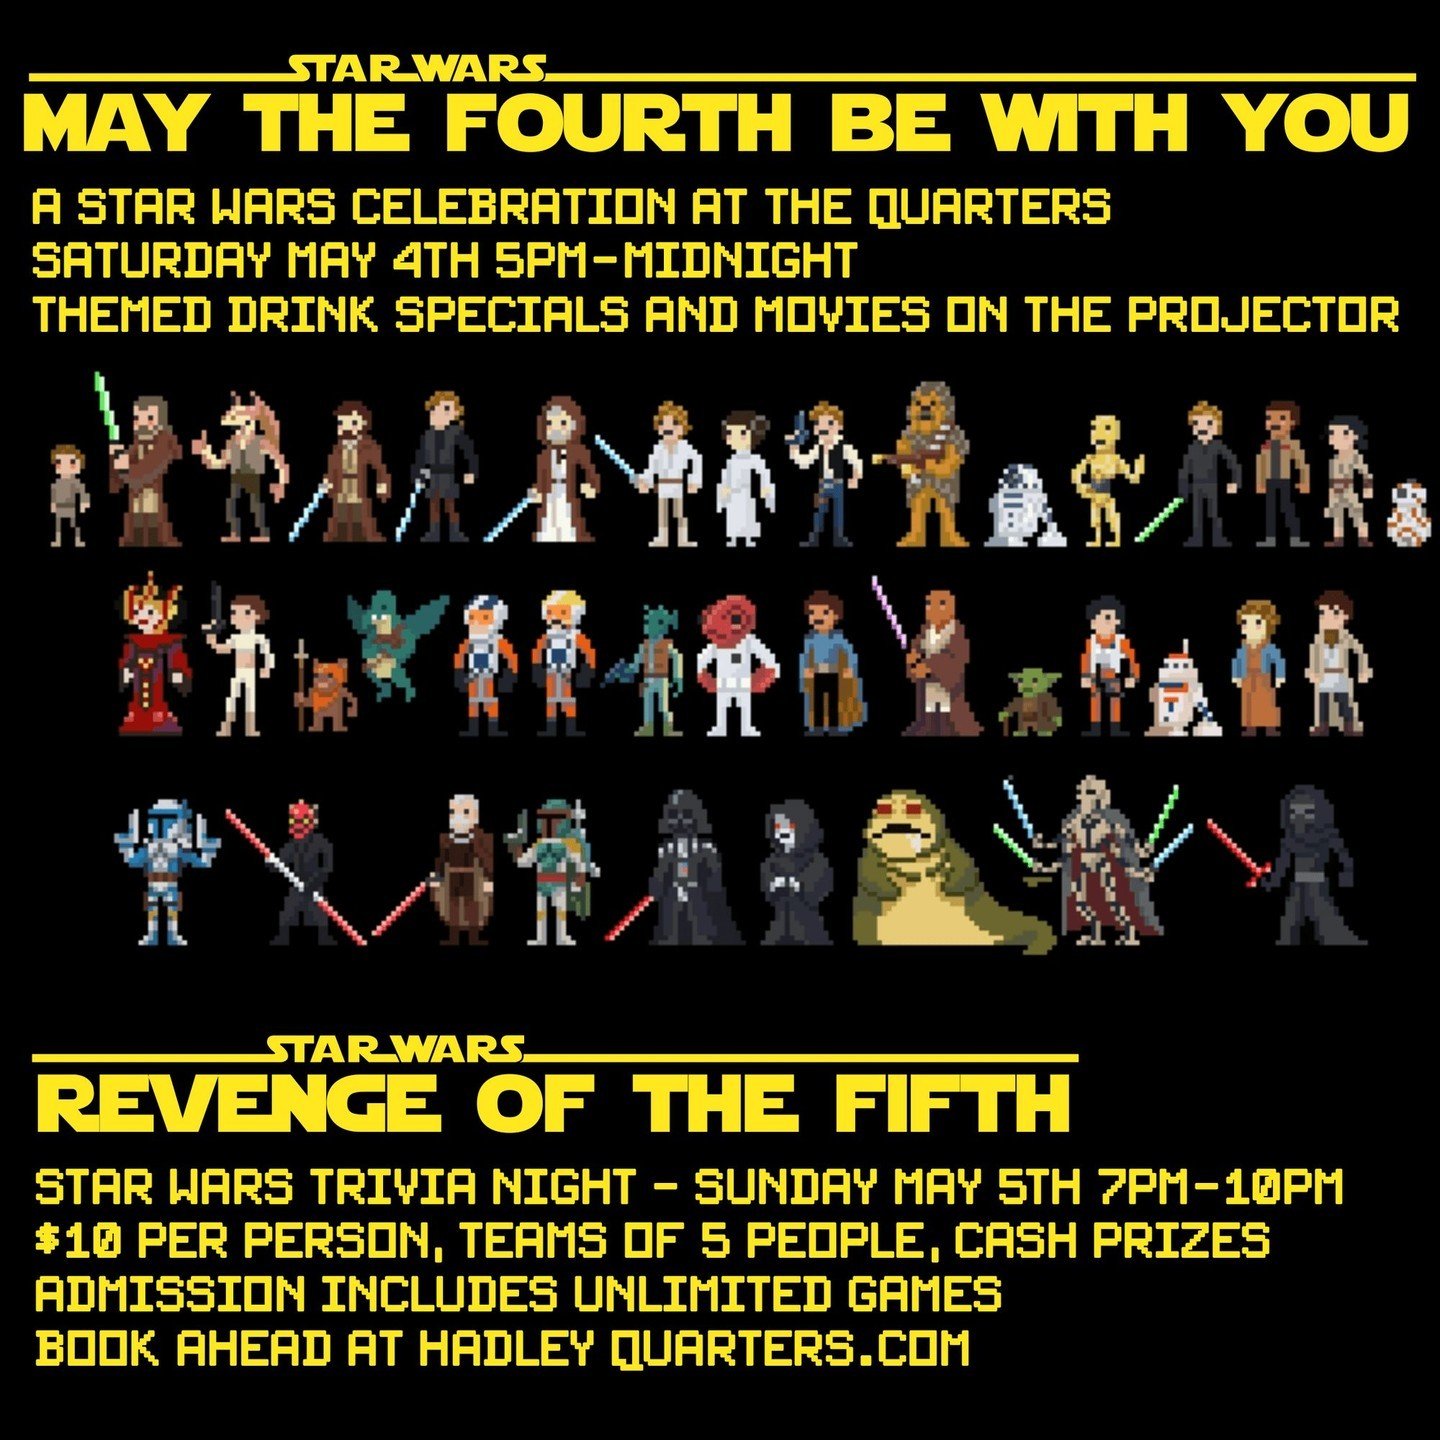 It's Star Wars weekend at The Quarters!

On Saturday, May the Fourth be with you! Themed drink specials and movies on the projector all night. Costumes encouraged!

On Sunday it's Revenge of the Fifth- Star Wars trivia!

Bring your team of five peopl